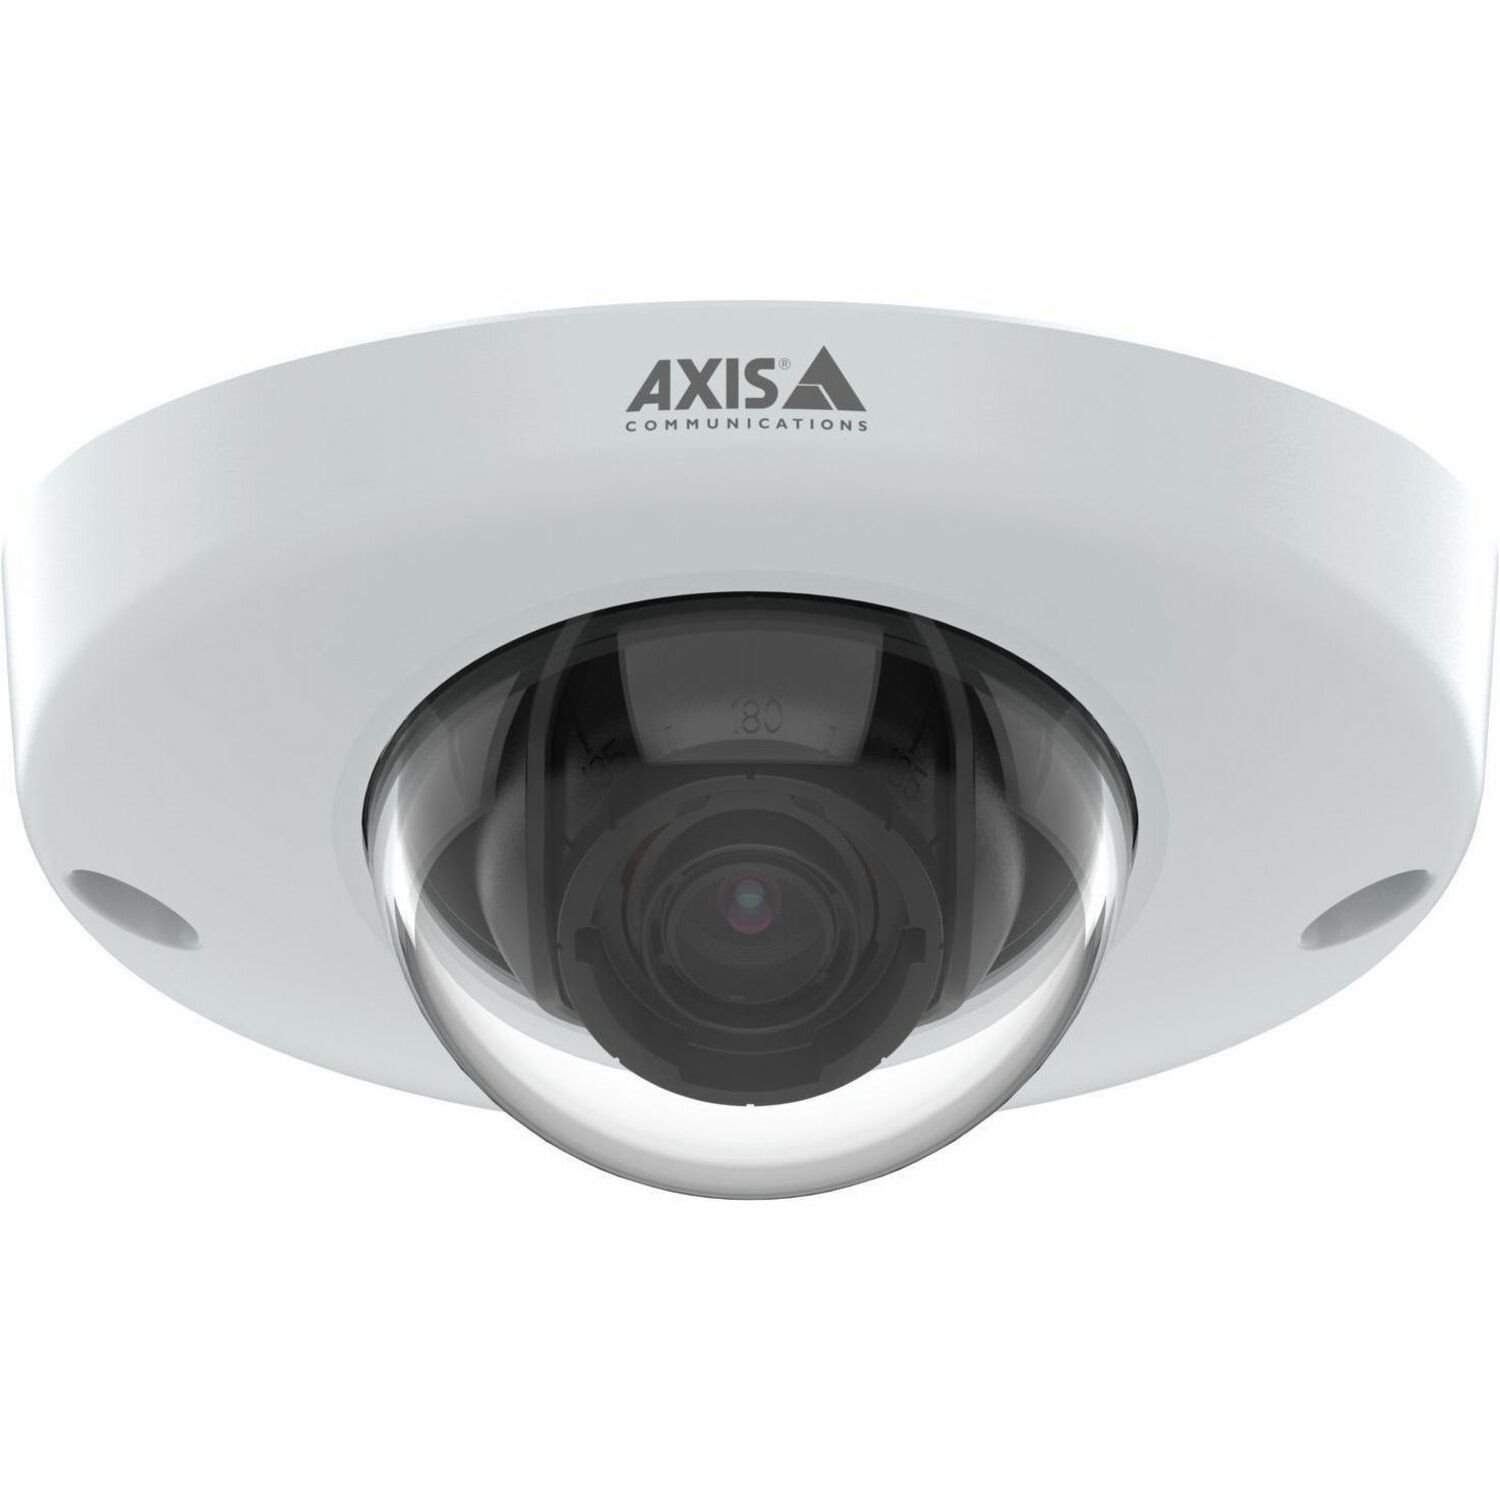 AXIS WizMind M3905-R 2 Megapixel Outdoor Full HD Network Camera - Colour - Dome - TAA Compliant